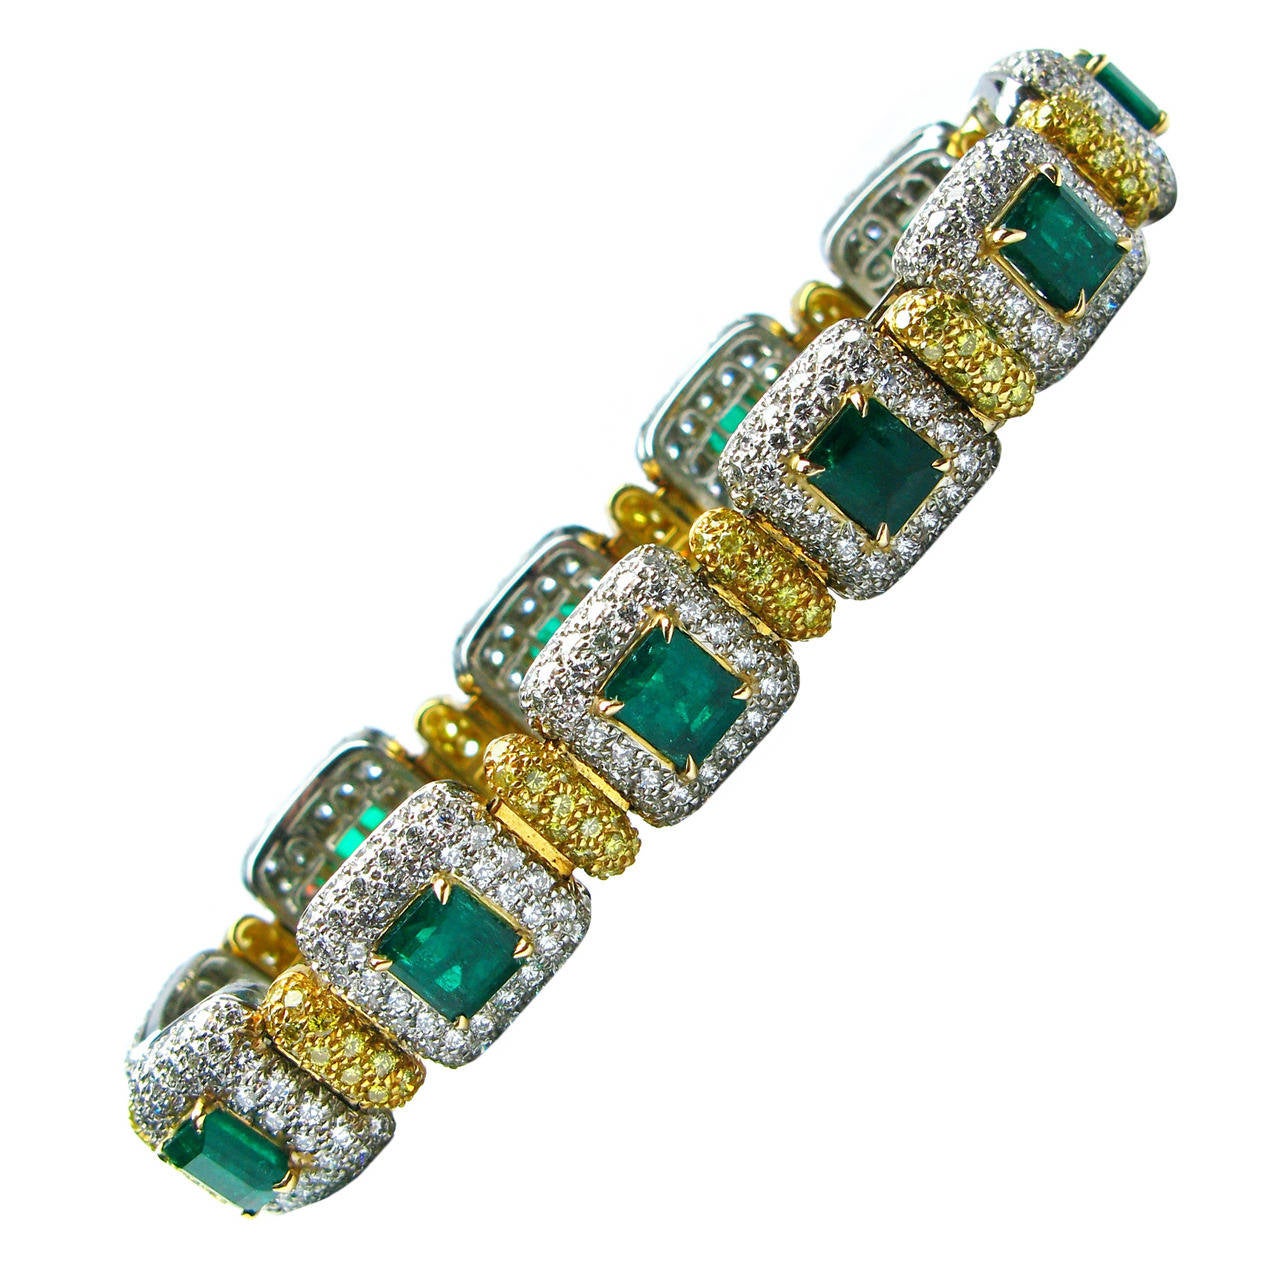 J. Birnbach 9.63 ct Emerald Bracelet with White and Fancy Yellow Pave Diamonds  For Sale